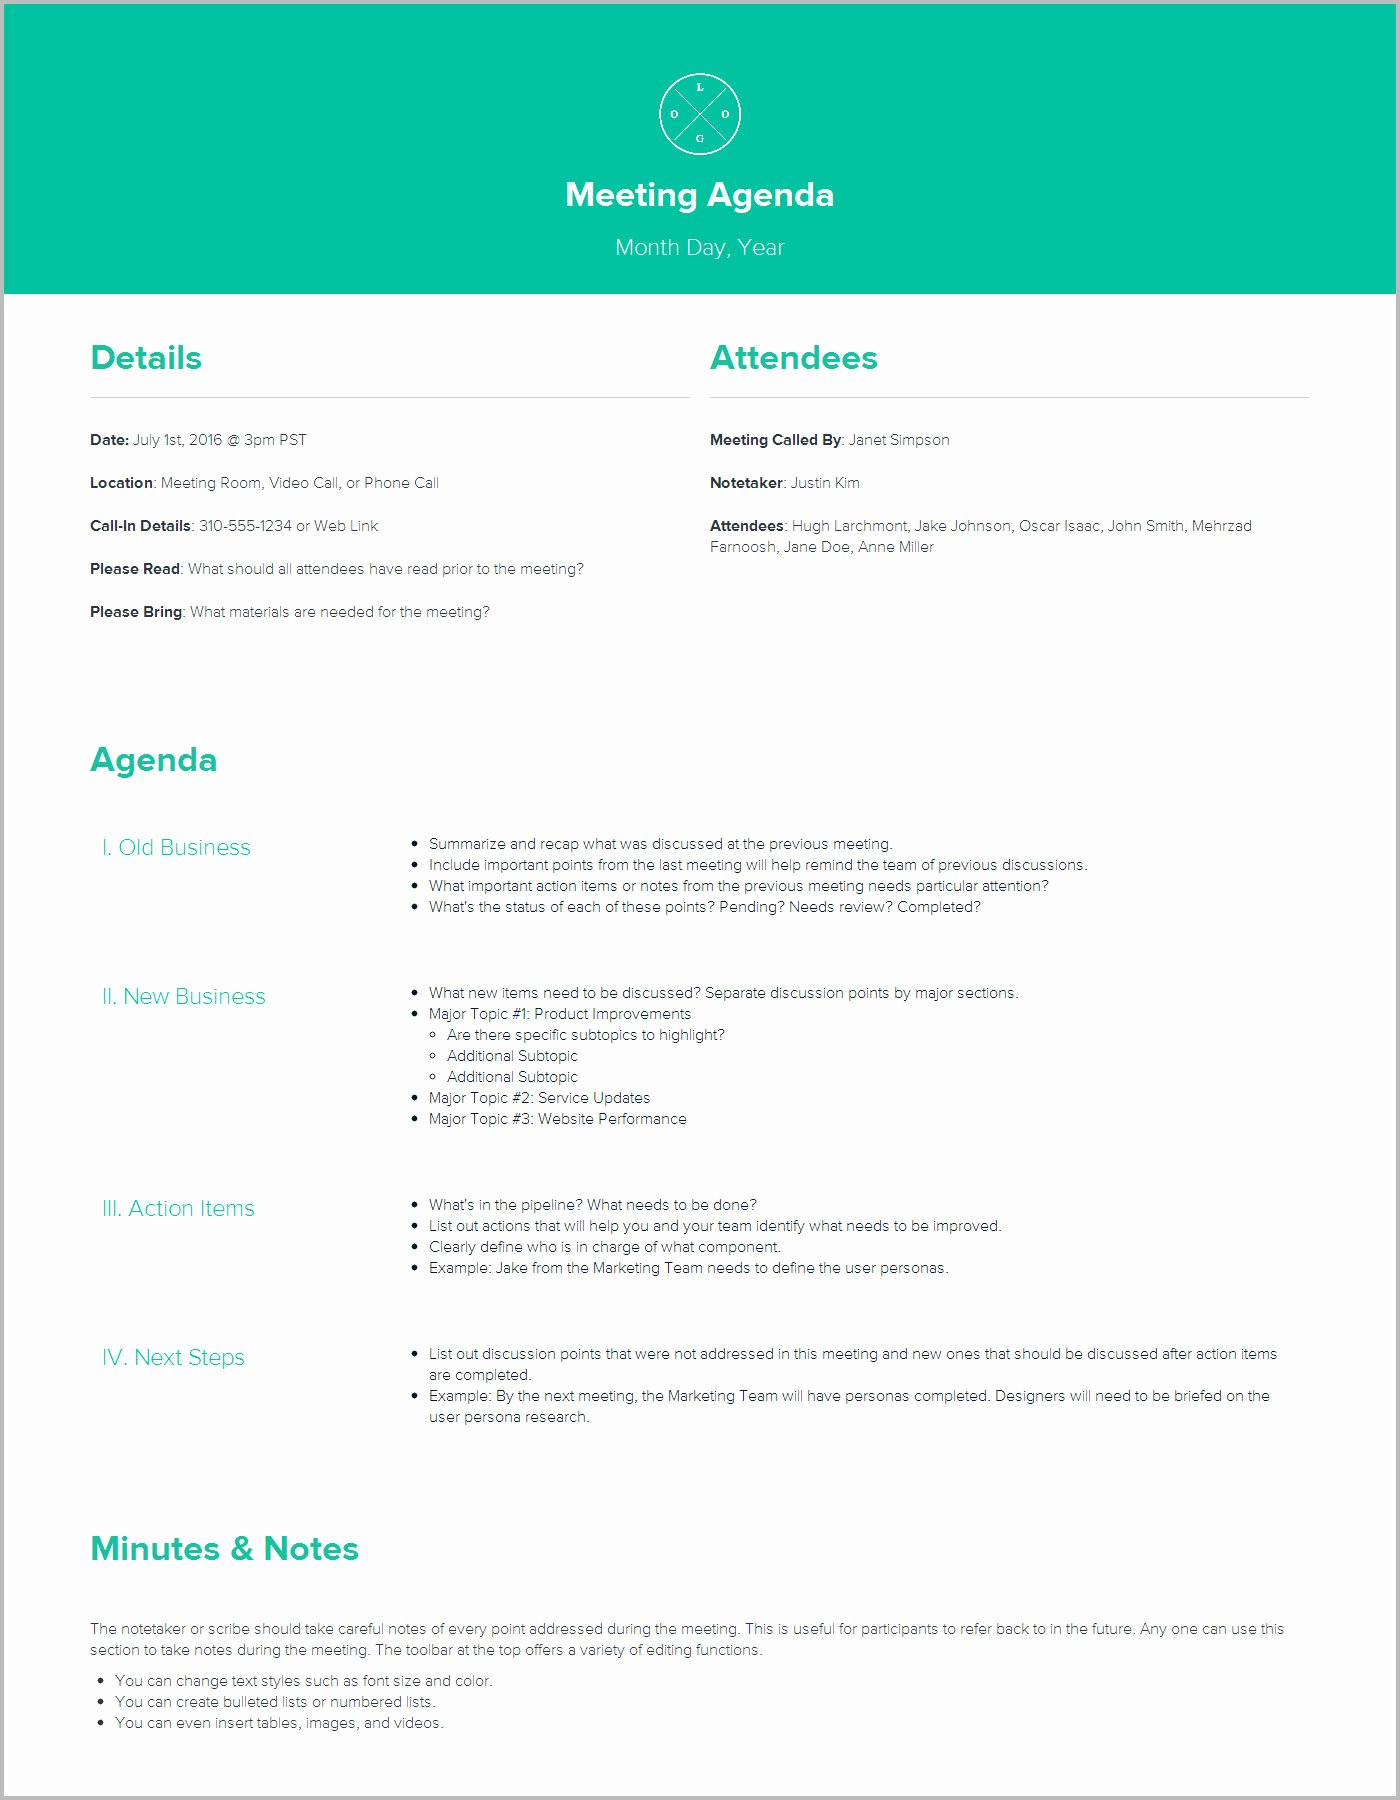 Meeting Minutes Agenda Template Inspirational How to Create A Meeting Agenda A Step by Step Guide